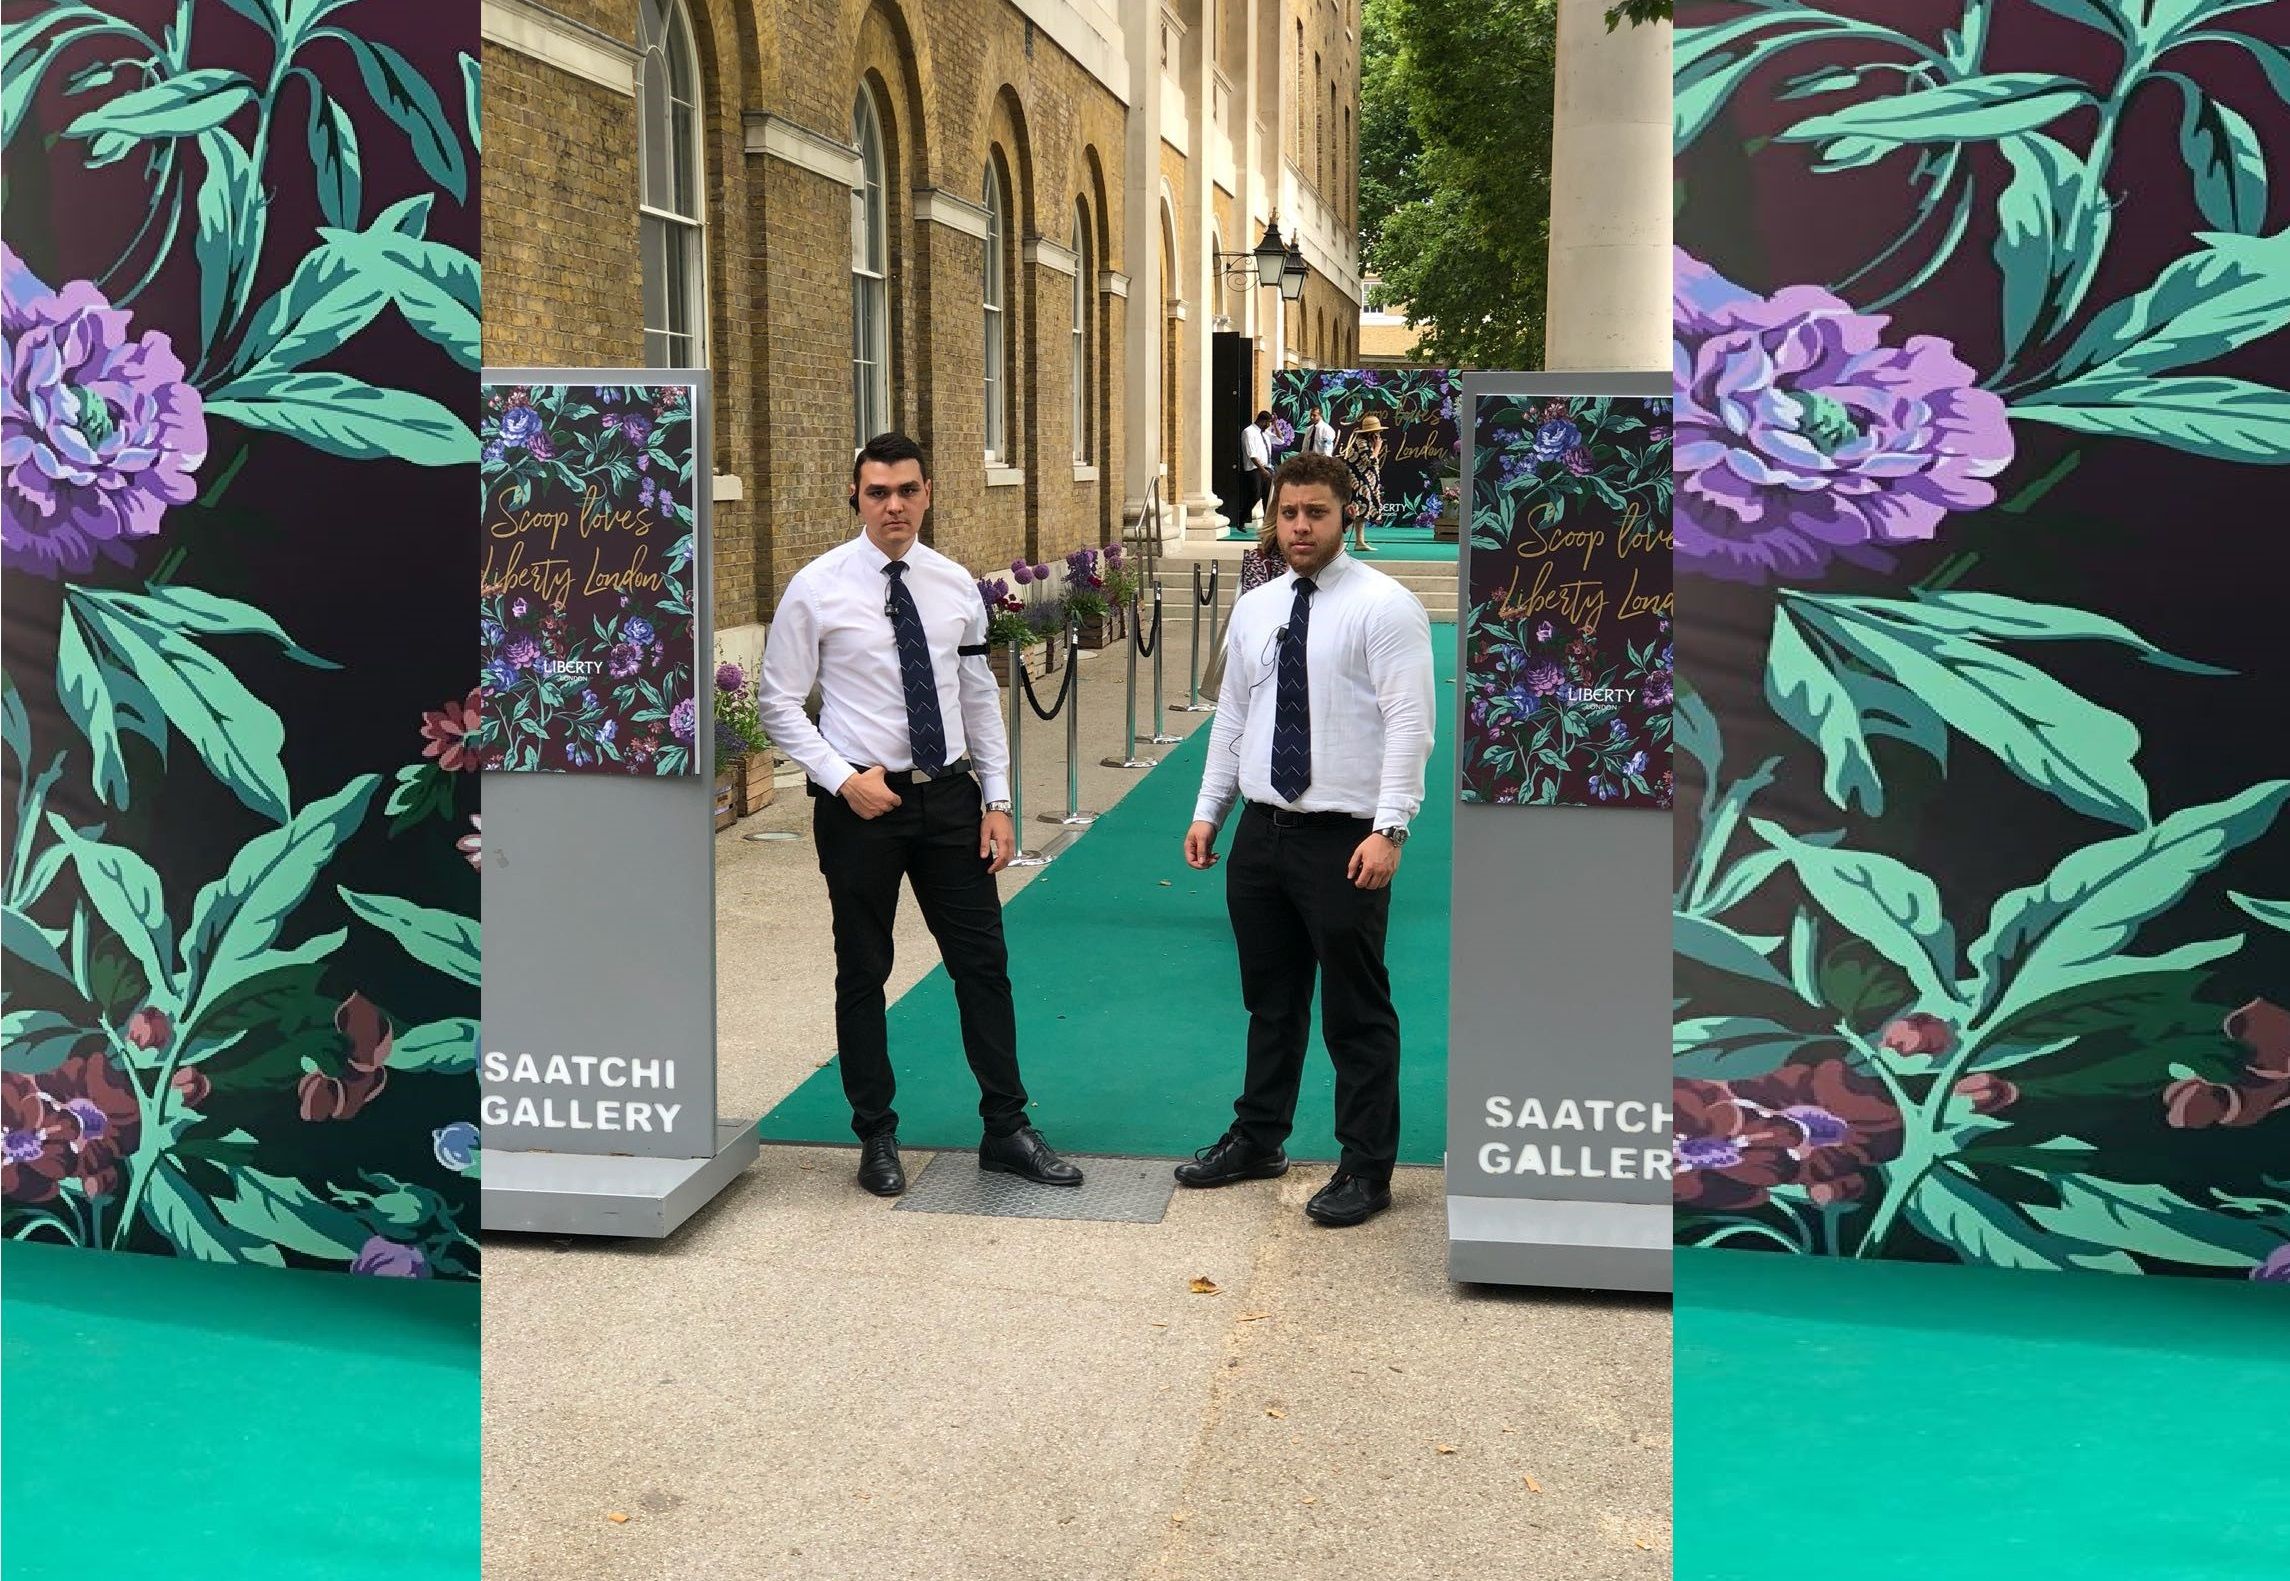 Uniformed Gallowglass Security officers on duty at an event hosted by the Saatchi Gallery.